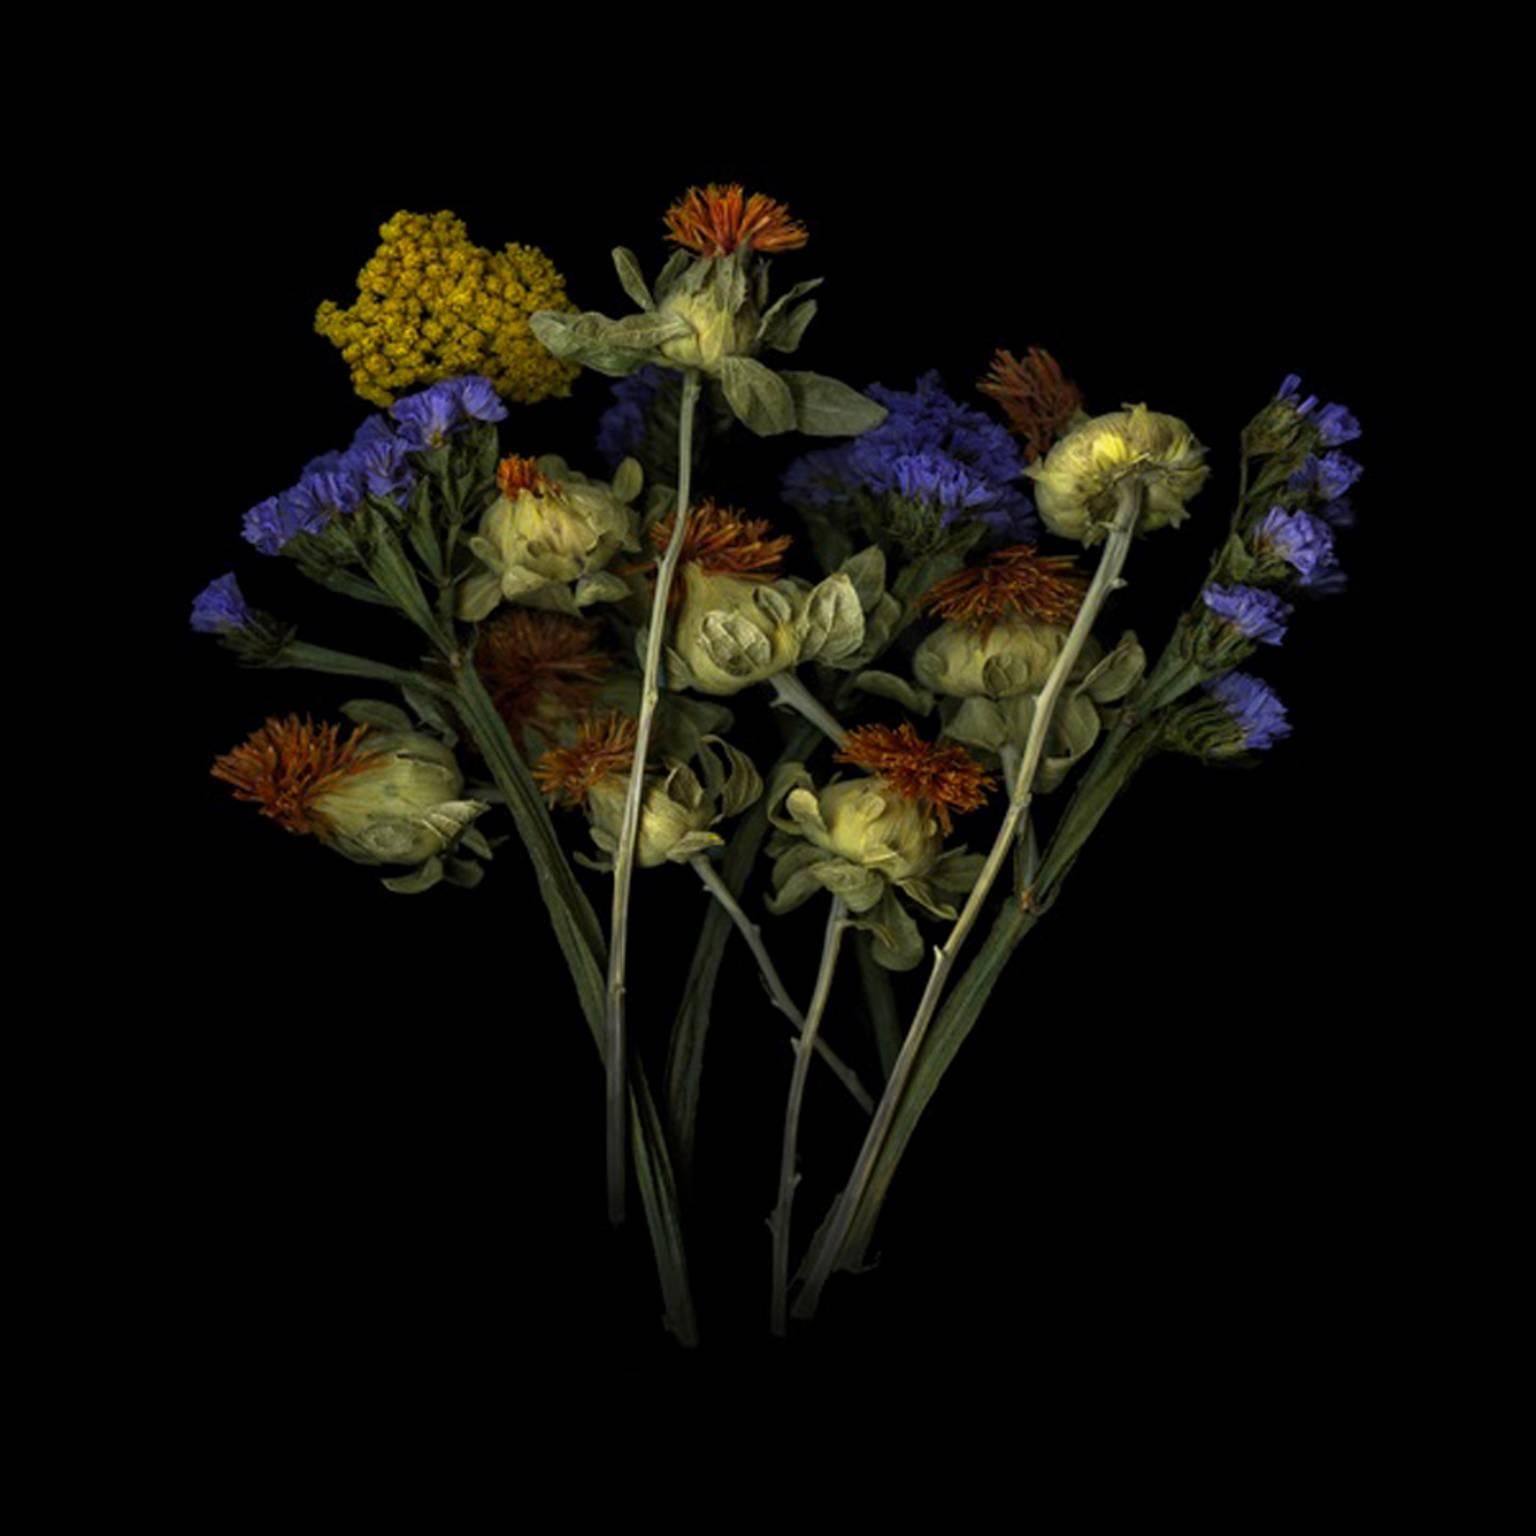 Jerry Freedner Color Photograph - Dried Flowers (Floral Still Life Photograph of Purple, Red, & Yellow Flowers)